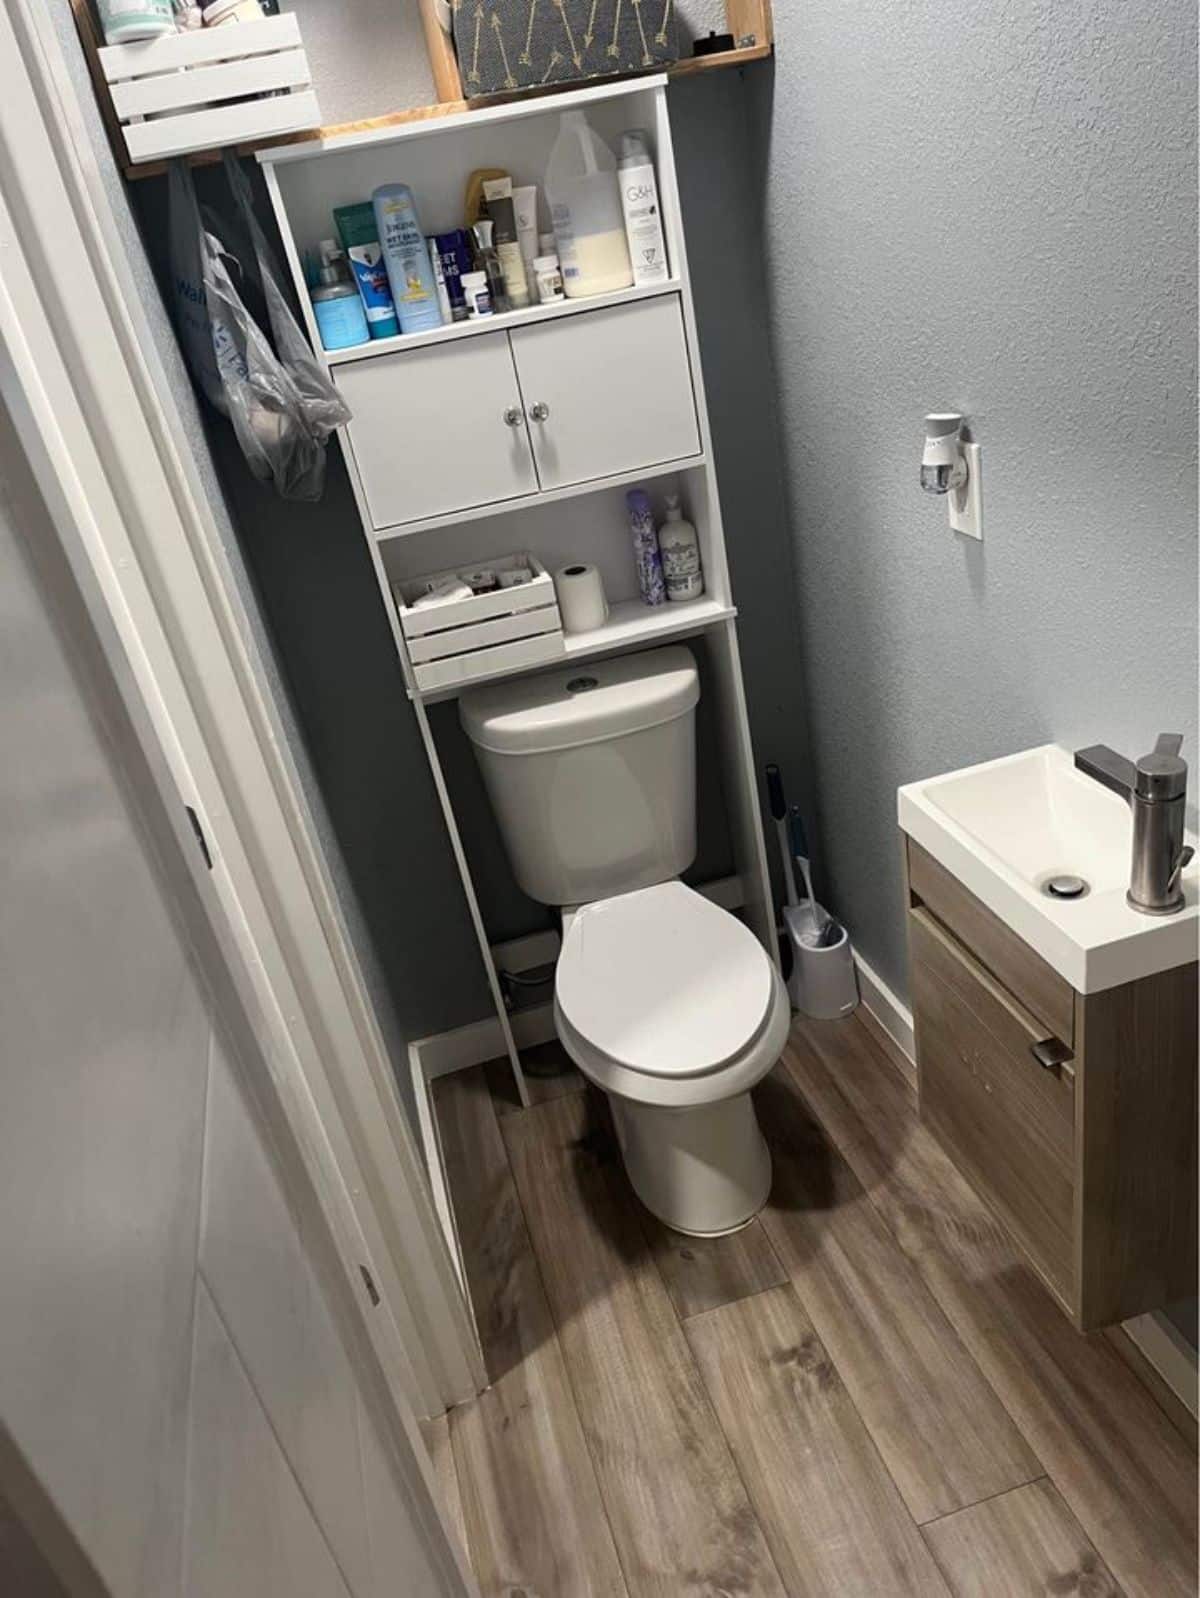 Bathroom area of 40-feet Container Tiny Home